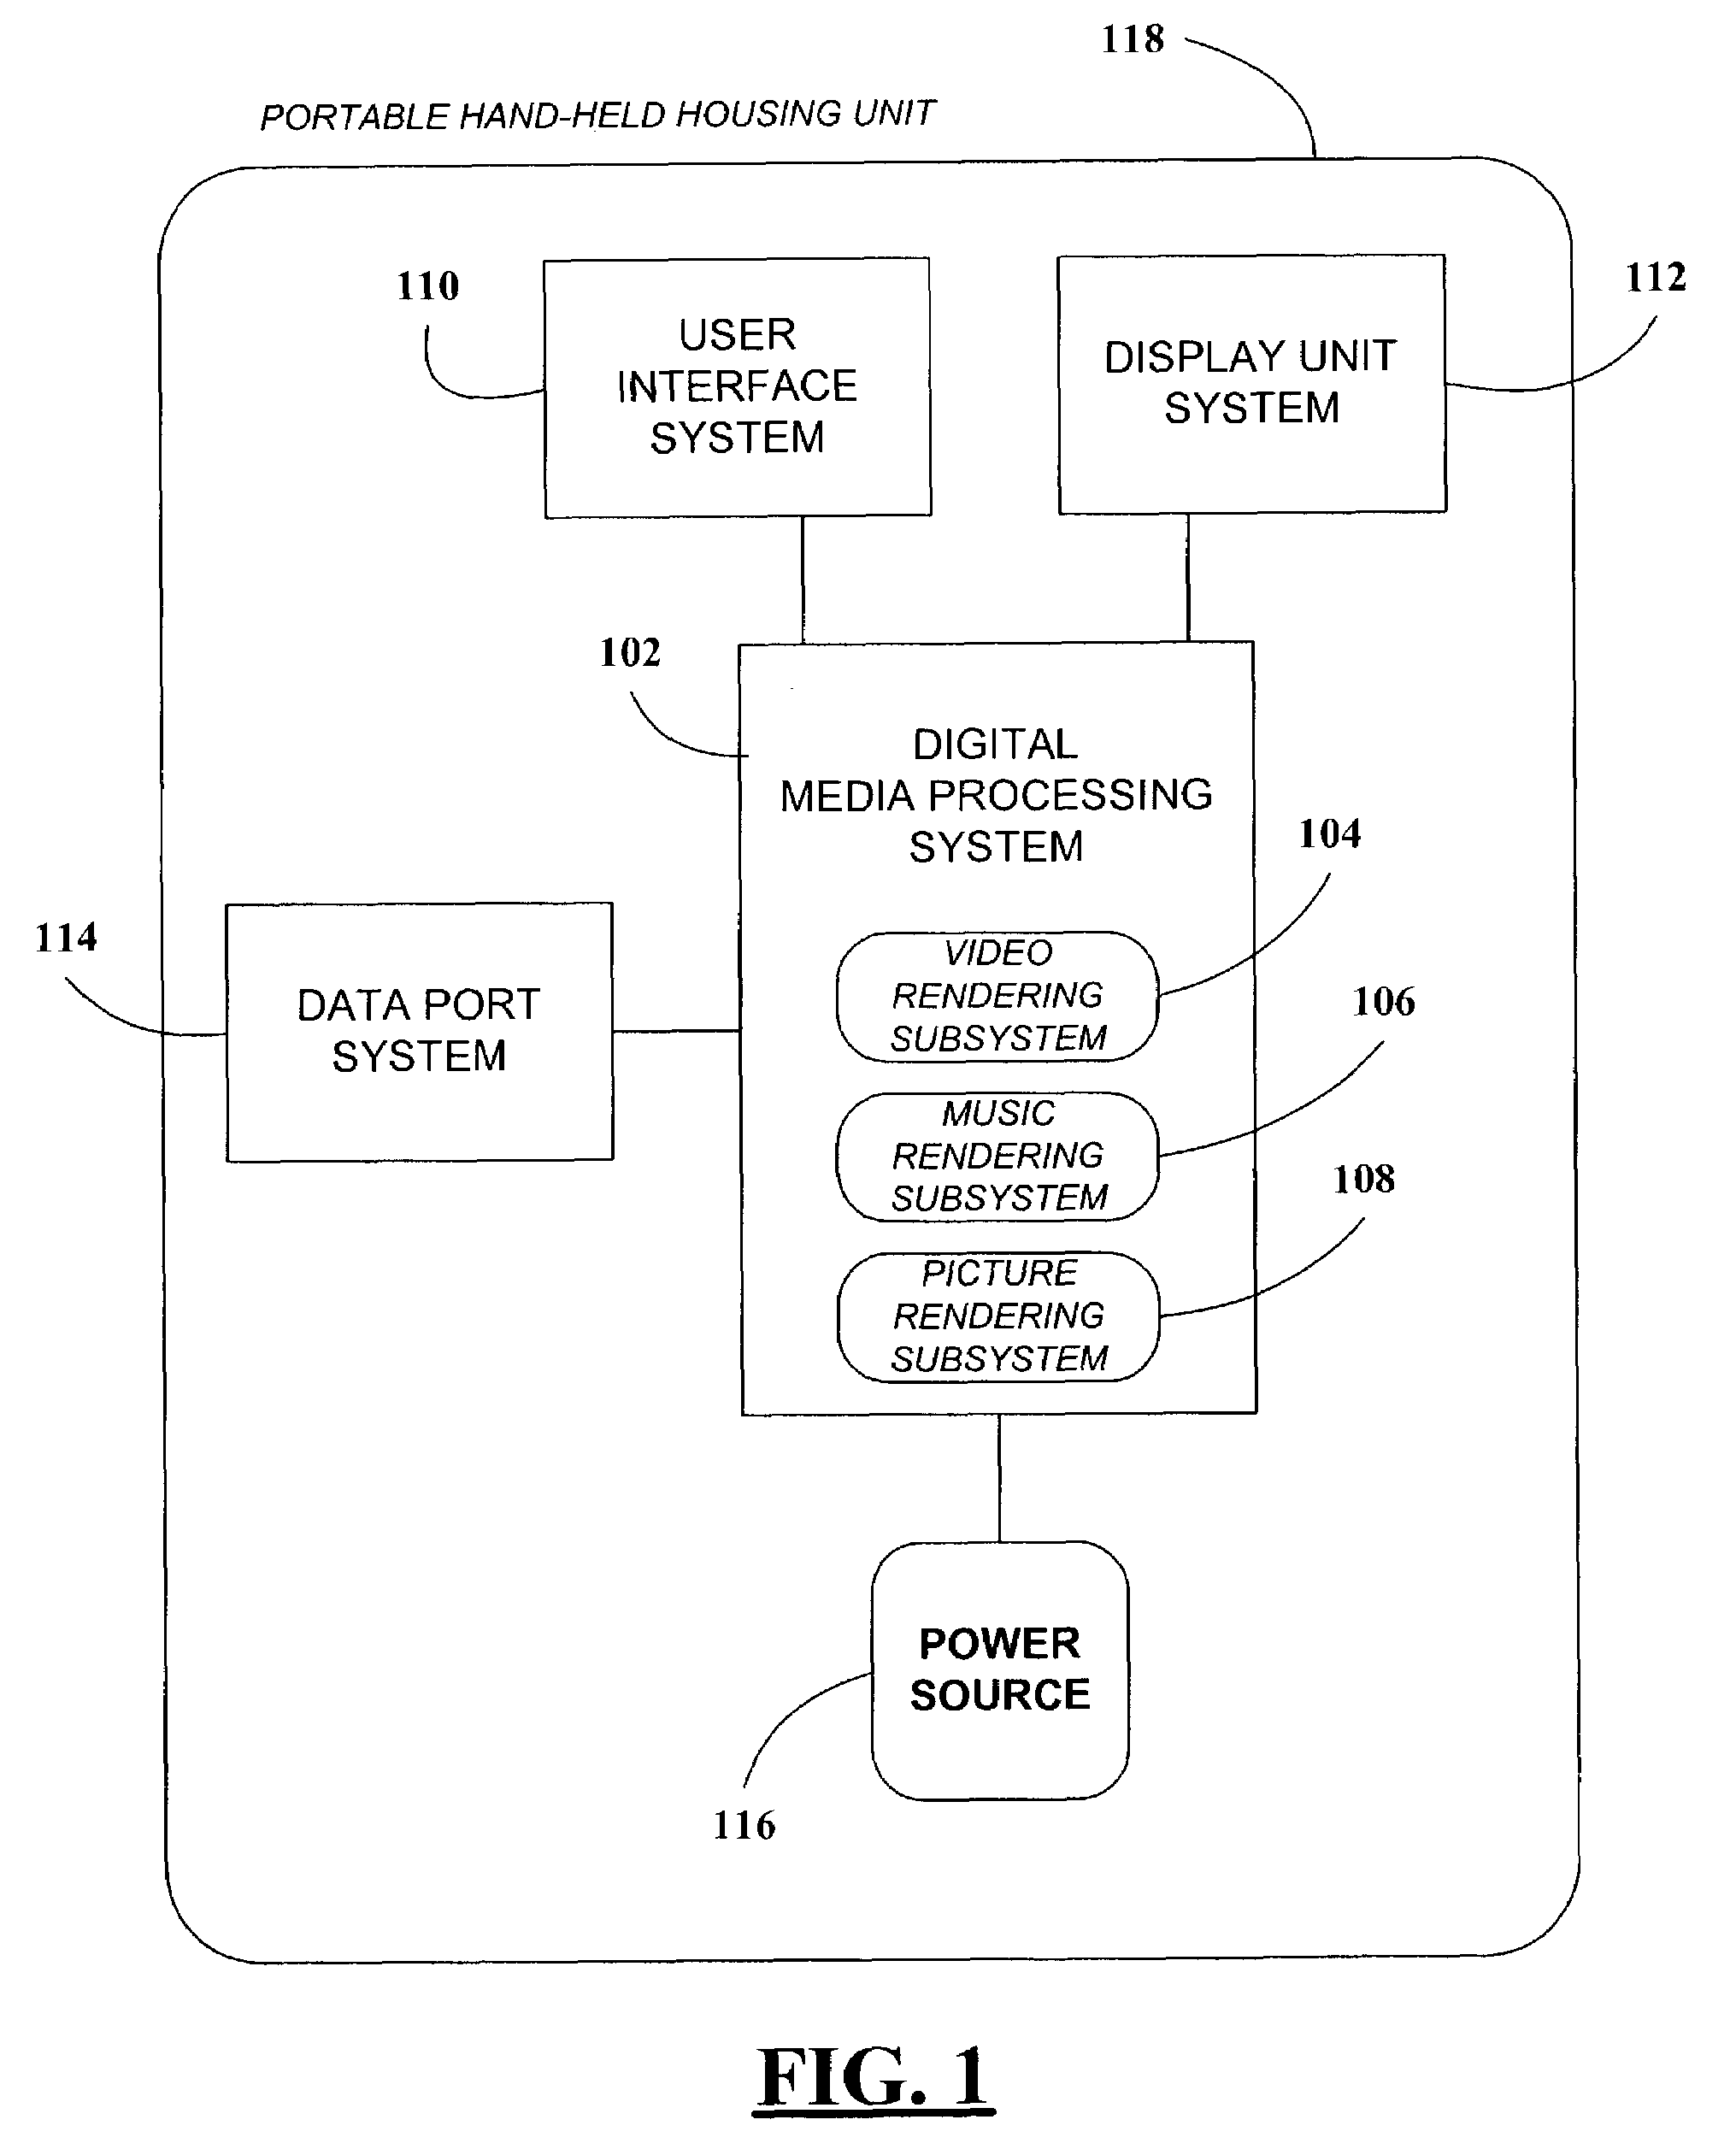 Systems and methods for receiving, storing, and rendering digital video, music, and pictures on a personal media player